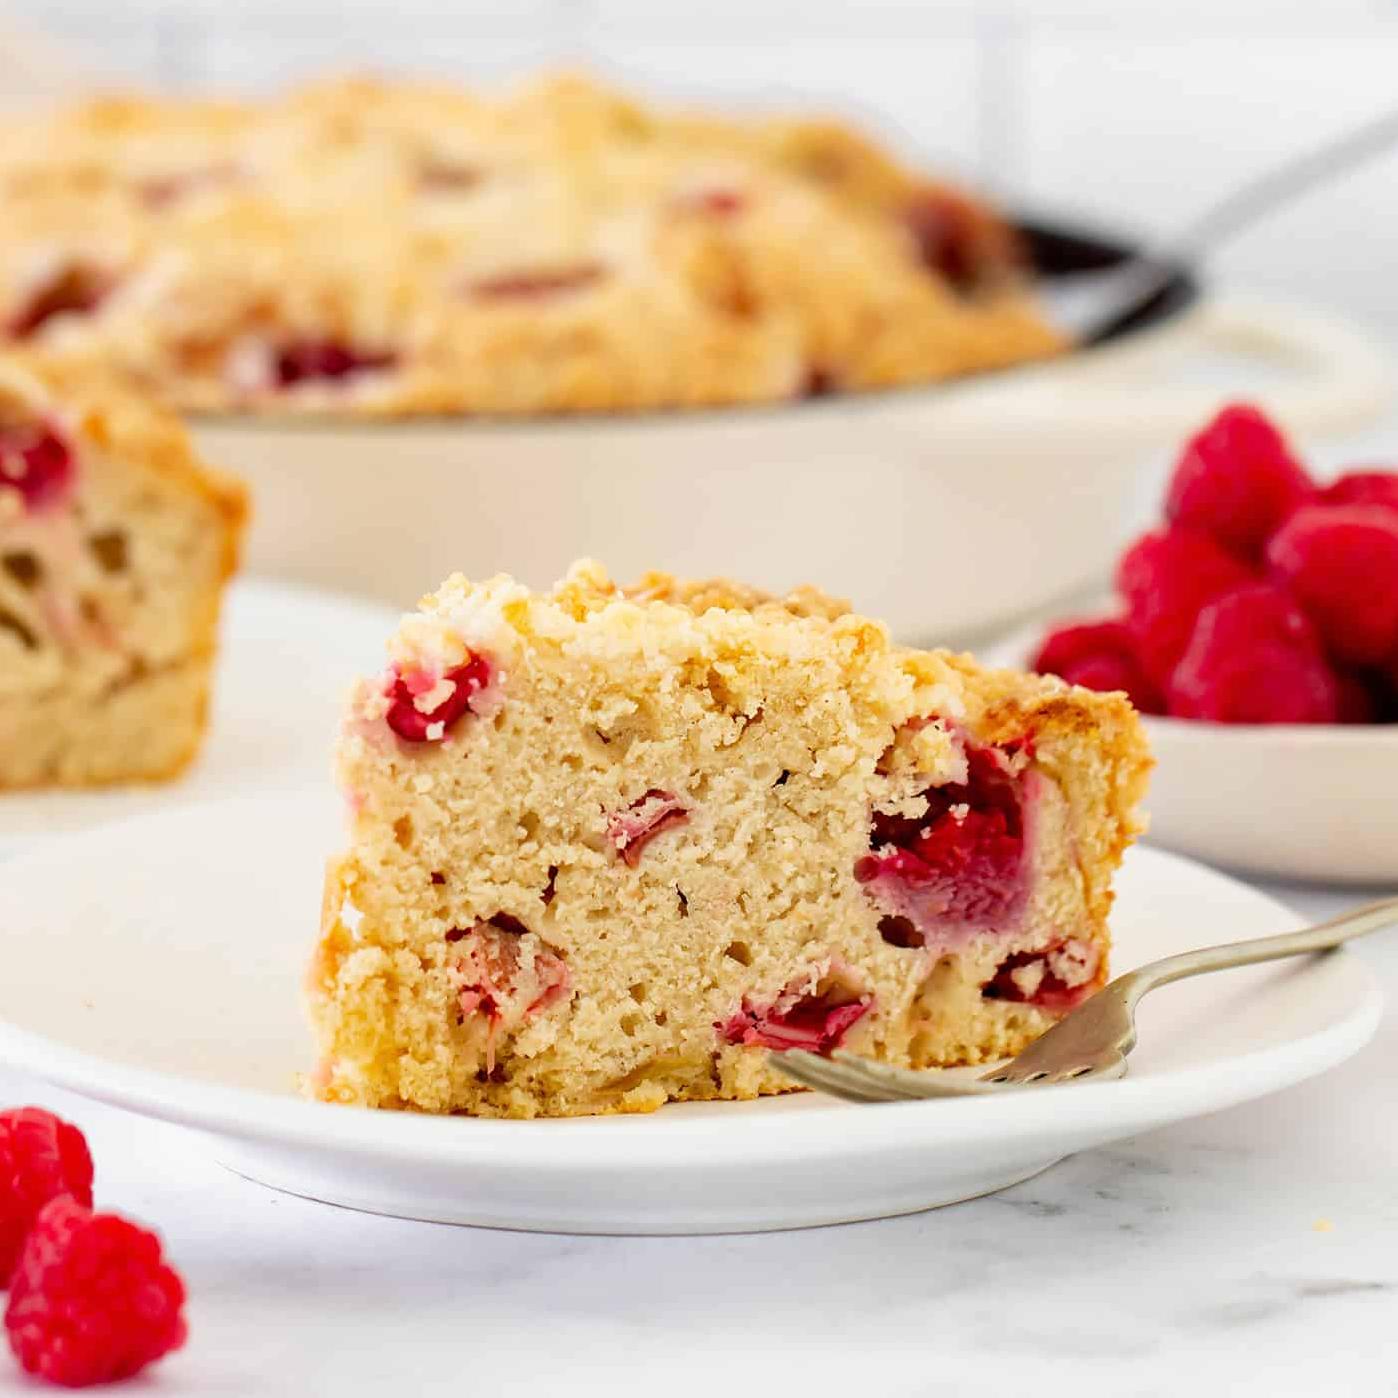  A slice of this rhubarb raspberry coffee cake is the perfect start to your day.